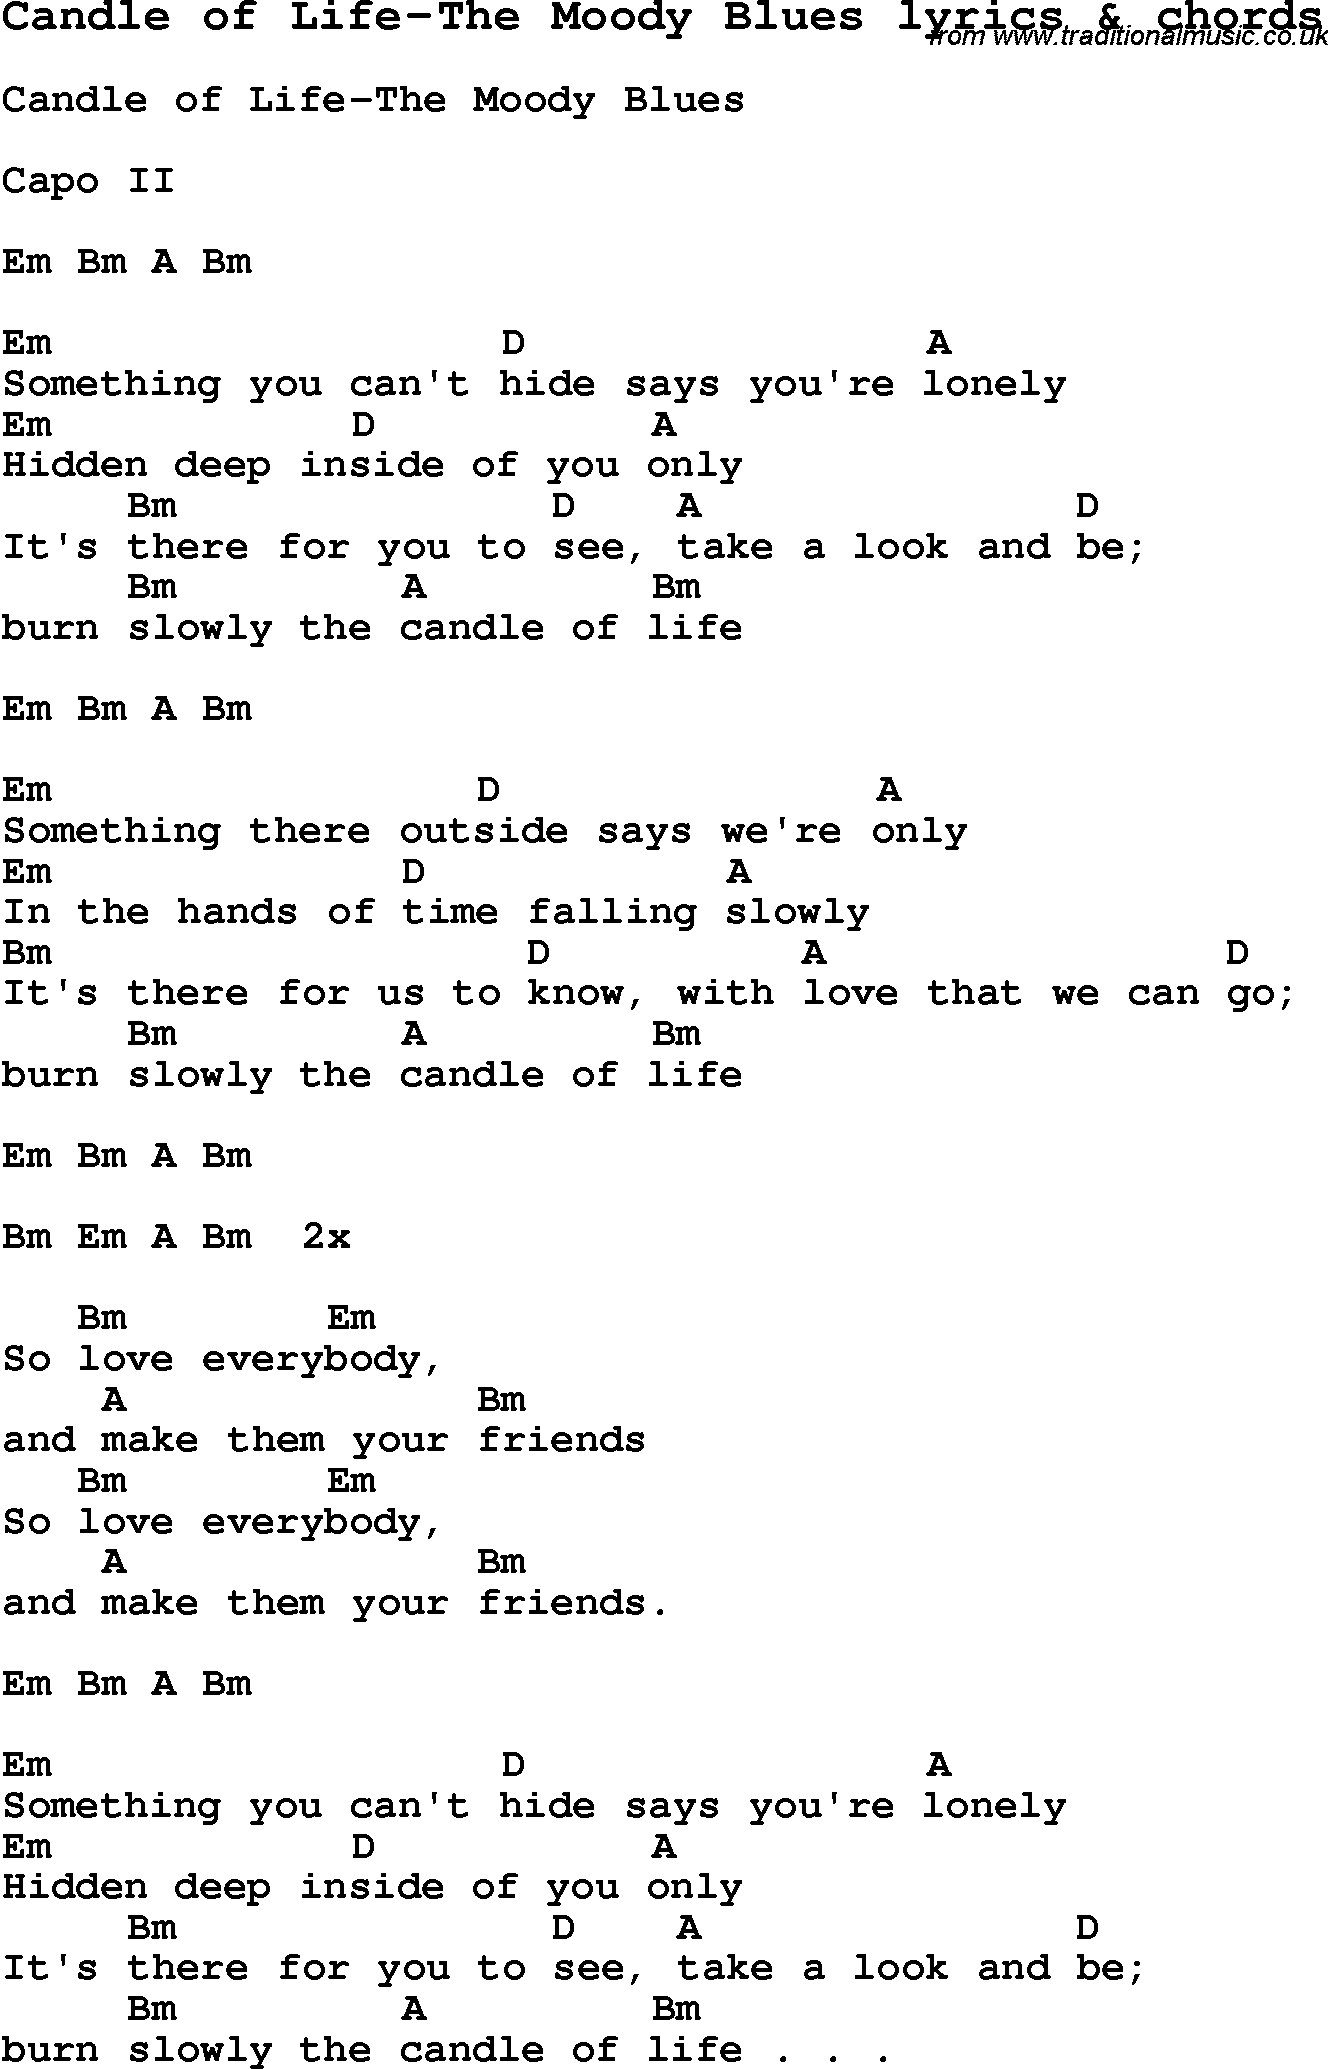 Love Song Lyrics for: Candle of Life-The Moody Blues with chords for Ukulele, Guitar Banjo etc.